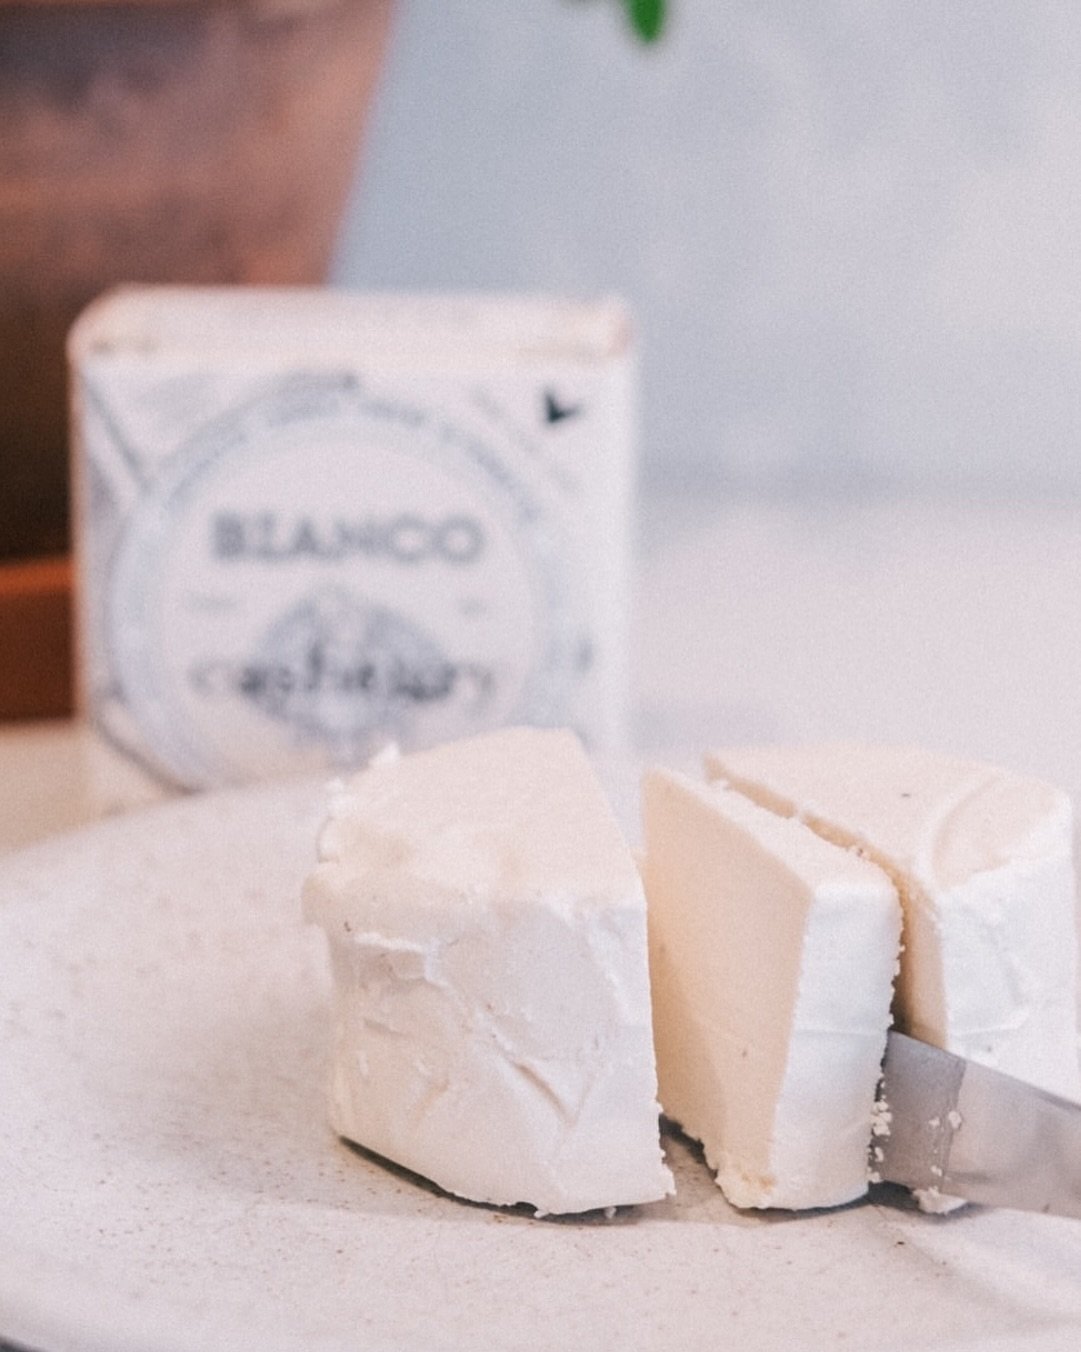 BIANCO 
Our Bianco cheeze is our purest product with the fewest ingredients - yet it is one of our most cheesiest of cheezes. 
The natural sweetness of our organic cashew nuts combined with the fermentation process from our bespoke cultures creates a